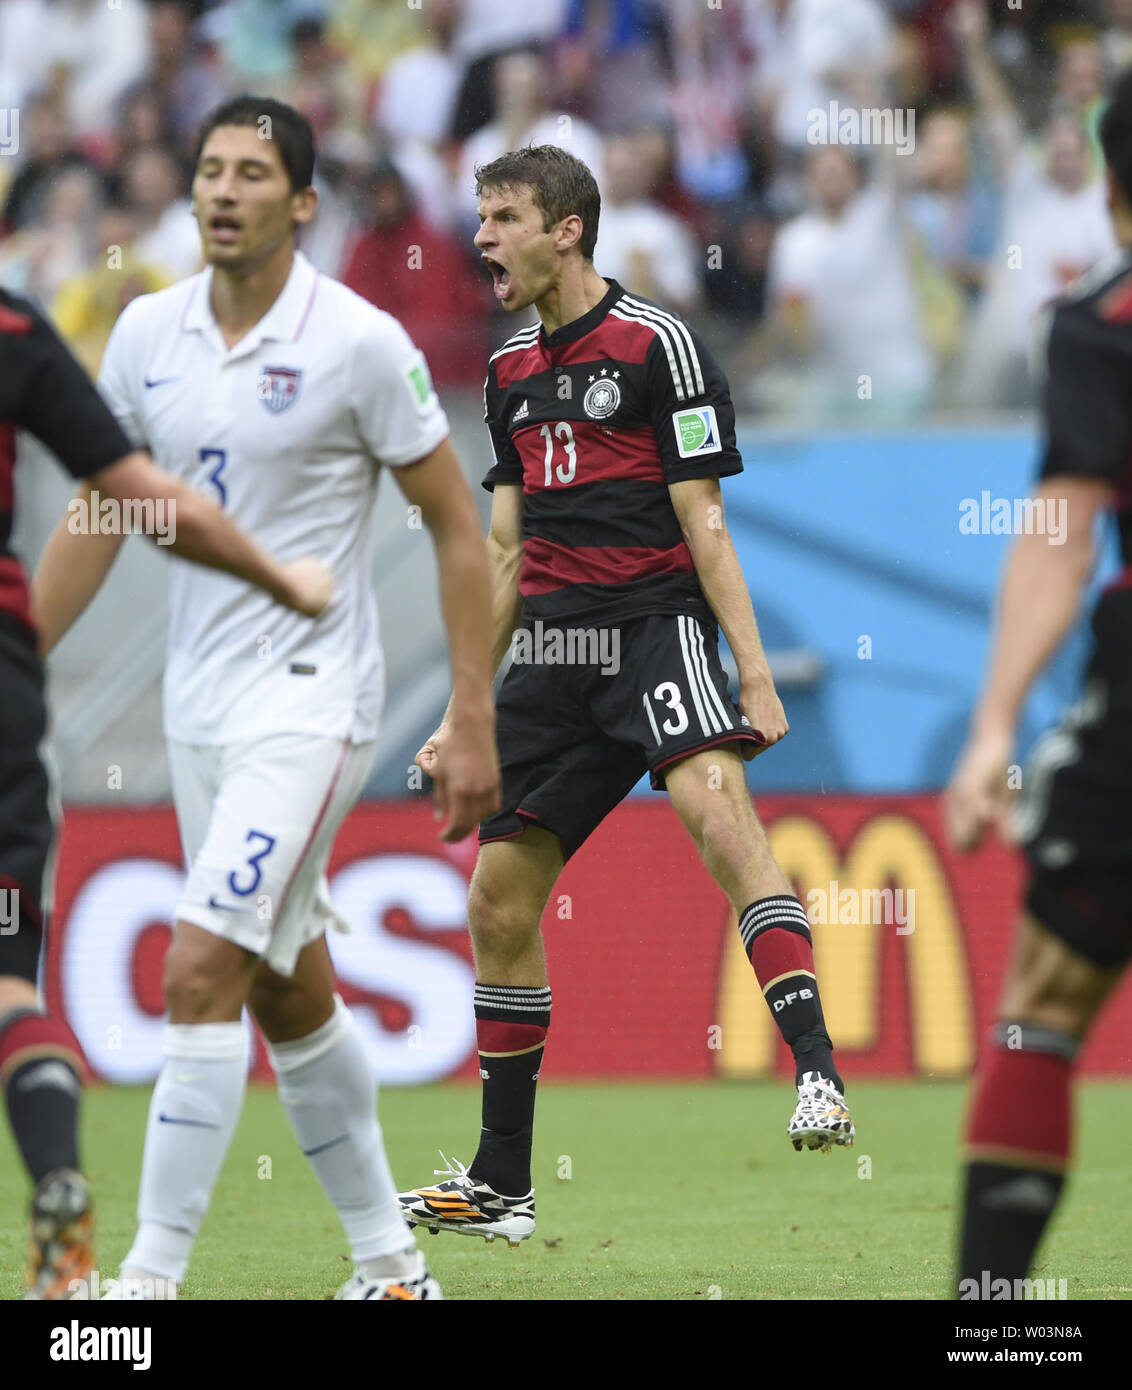 Thomas Muller of Germany celebrates scoring the opening goal during the 2014 FIFA World Cup Group G match at the Arena Pernambuco in Recife, Brazil on June 26, 2014. UPI/Chris Brunskill Stock Photo